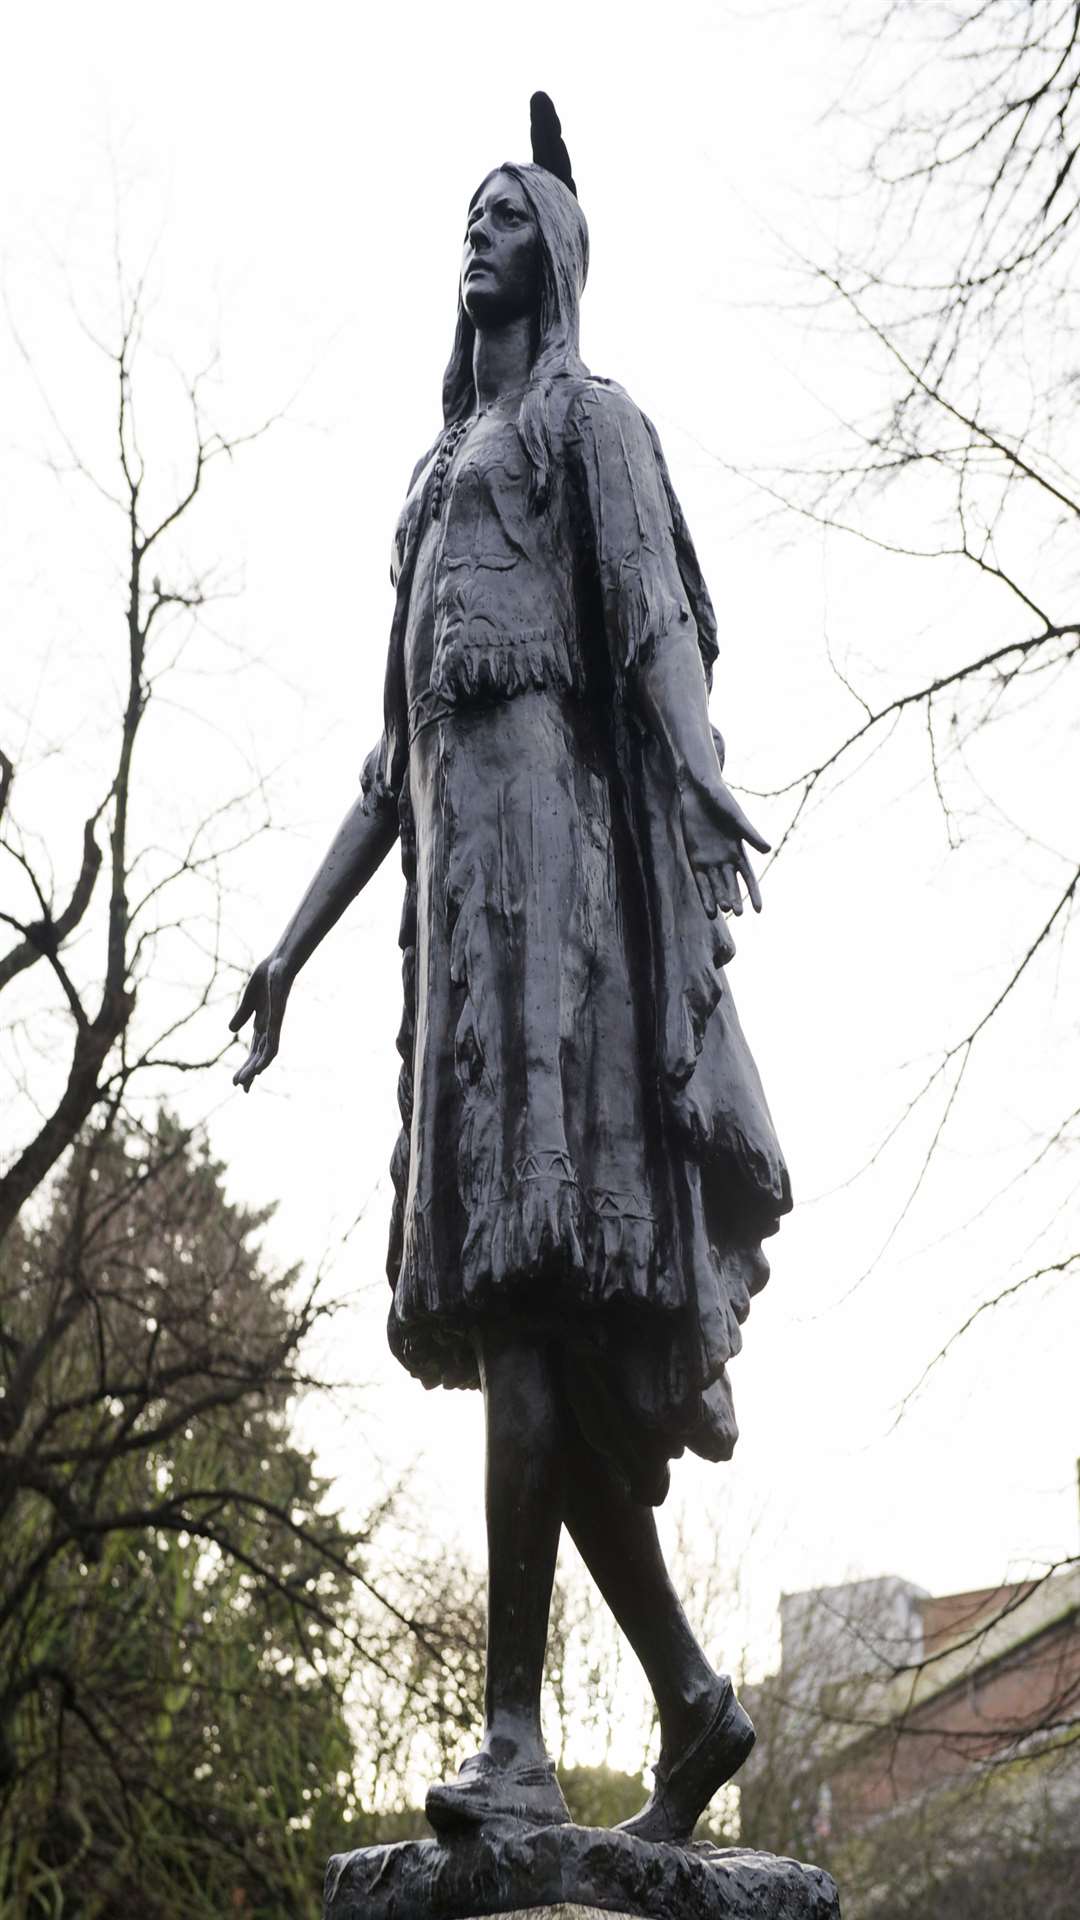 The statue of Pocahontas in Pocahontas Gardens, St George's Church, Gravesend